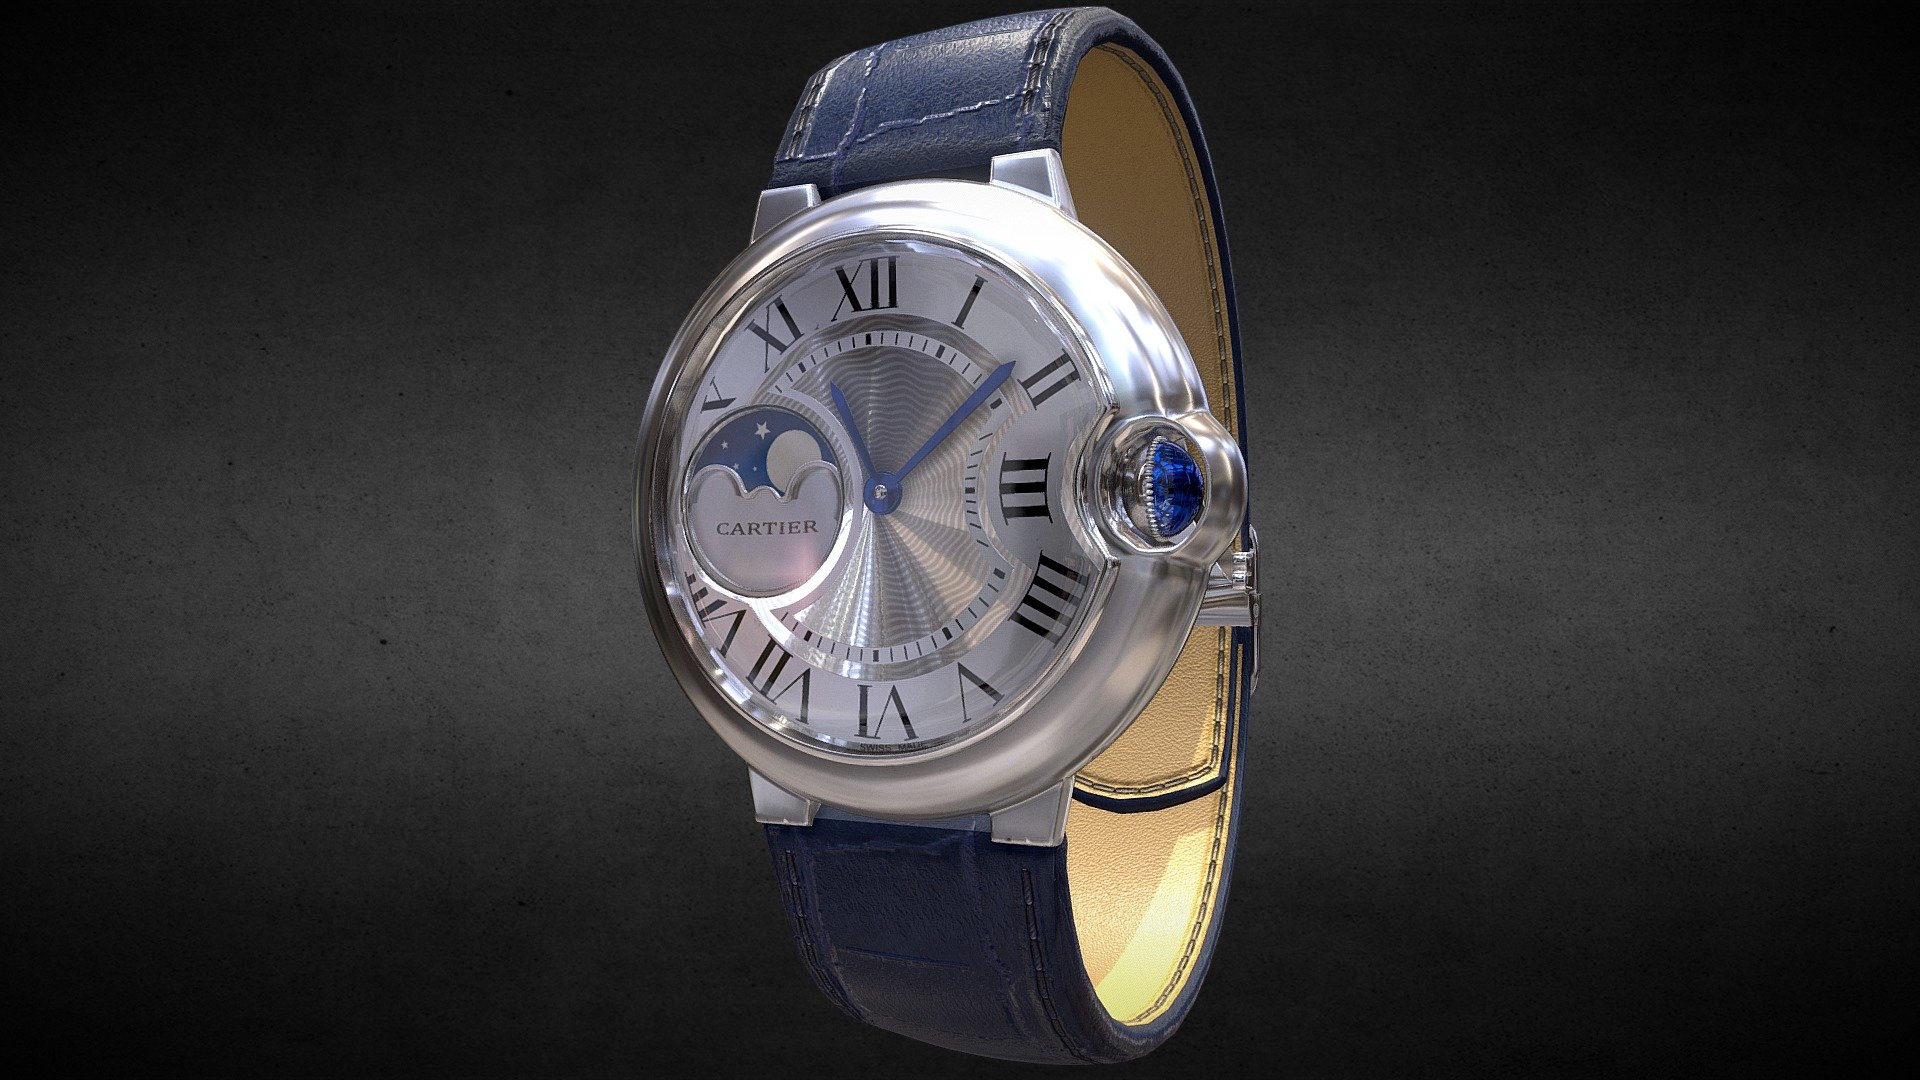 Awesome stainless steel Ballon Bleu de Cartier Watch․
Use for Unreal Engine 4 and Unity3D. Try in augmented reality in the AR-Watches app. 
Links to the app: Android, iOS

Currently available for download in FBX format.

3D model developed by AR-Watches

Disclaimer: We do not own the design of the watch, we only made the 3D model 3d model